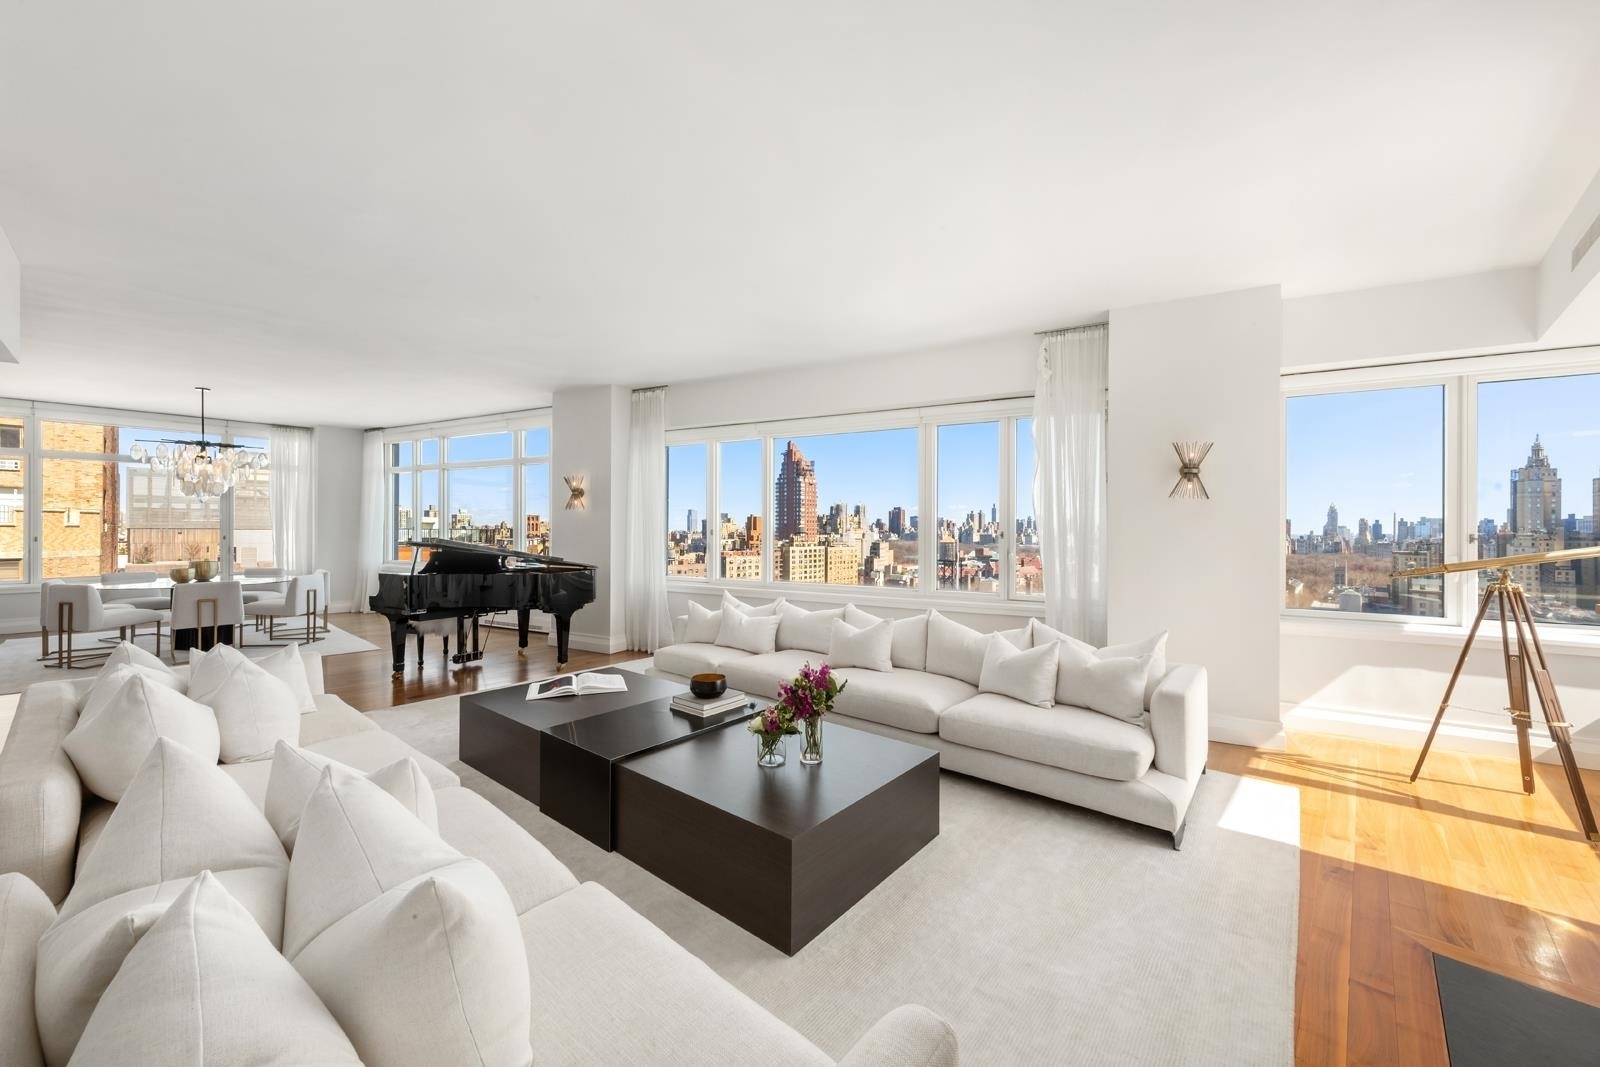 Condominium for Sale at The Laureate, 2150 BROADWAY, PENTHOUSE Upper West Side, New York, NY 10023